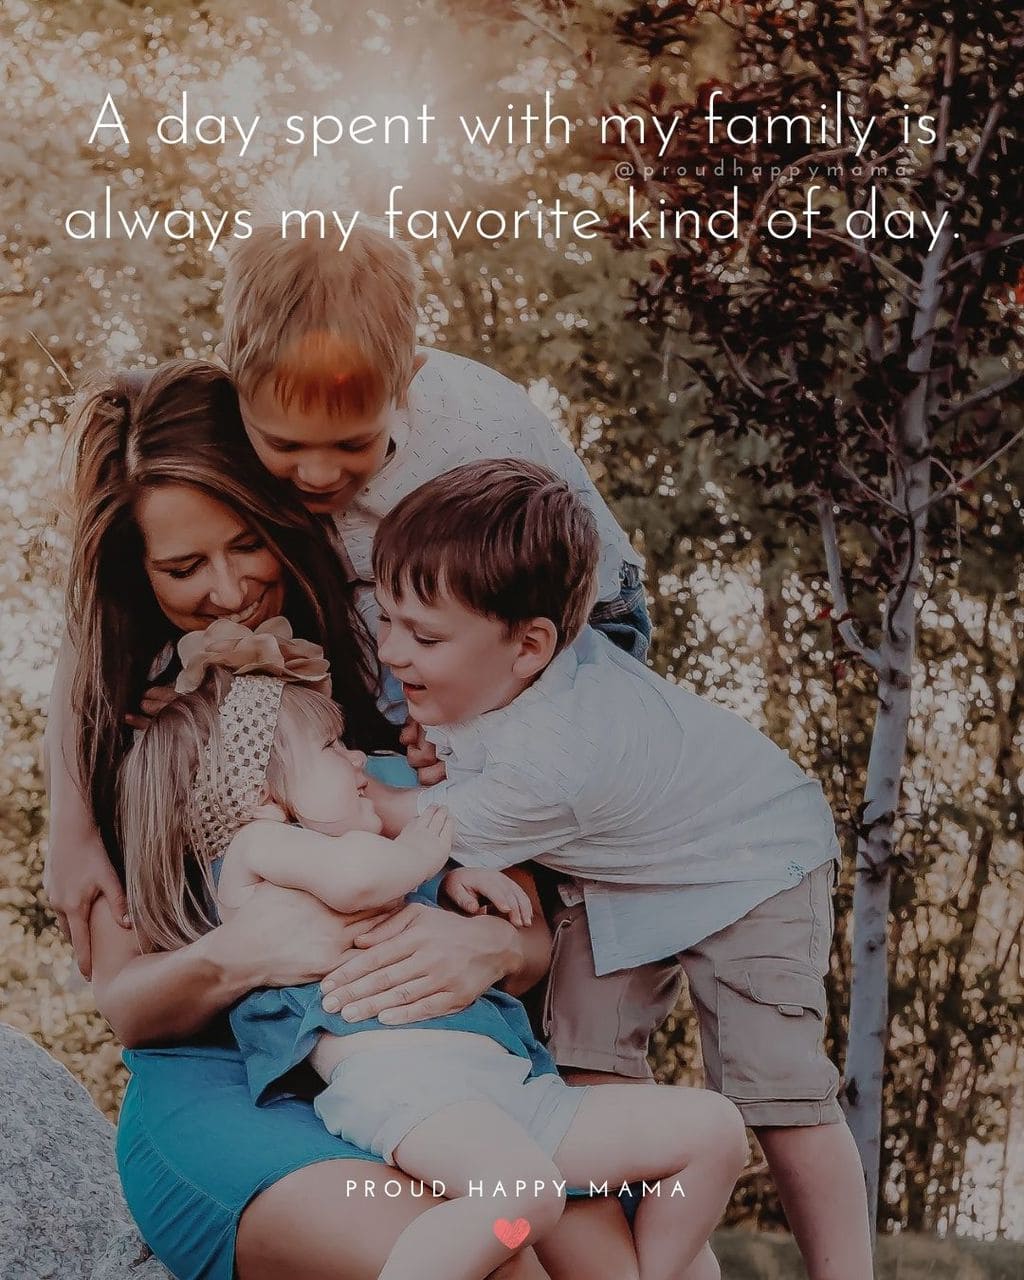 With Family Quotes | A day spent with my family is always my favorite kind of day.